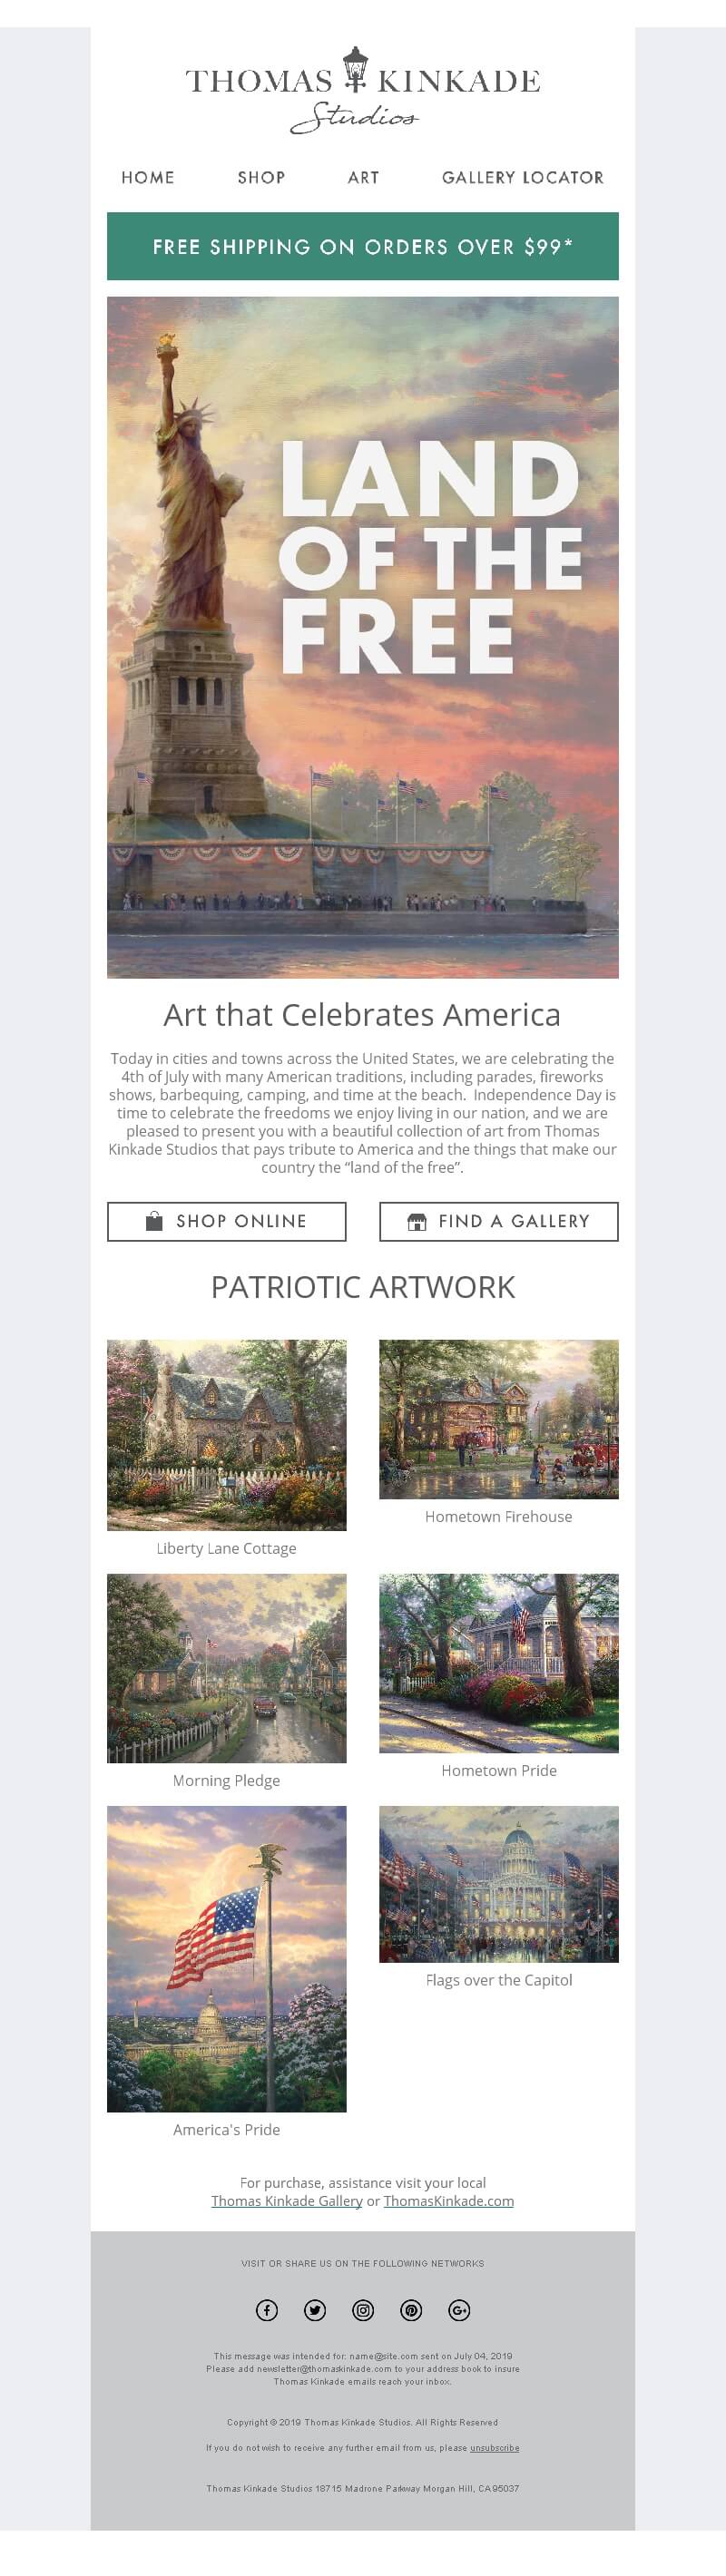 Independence Day email from Thomas Kinkade Studios